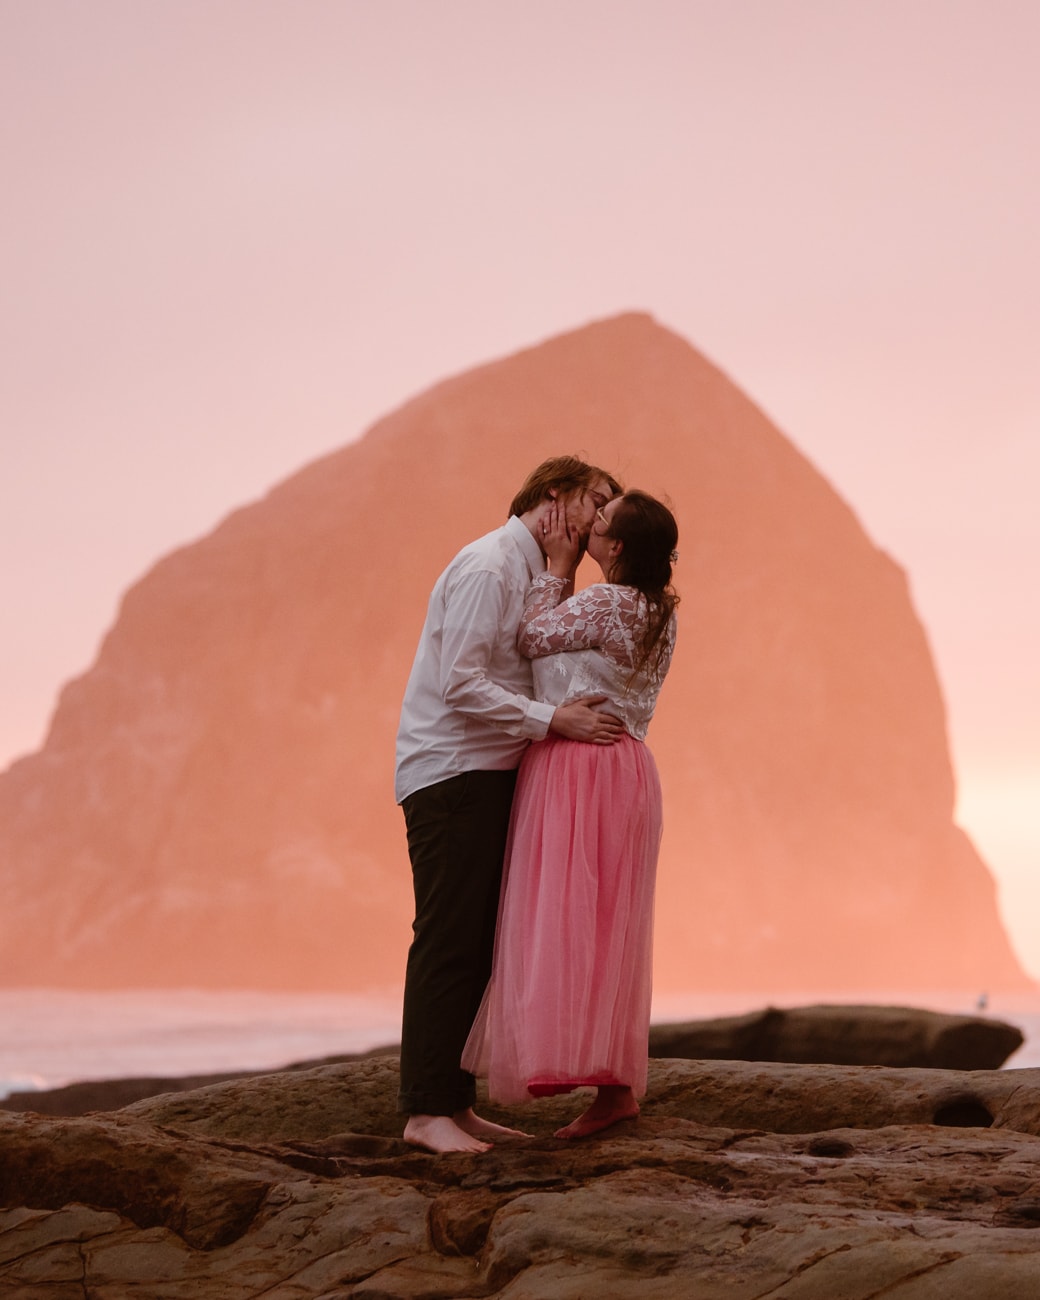 a man and woman kissing on the beach